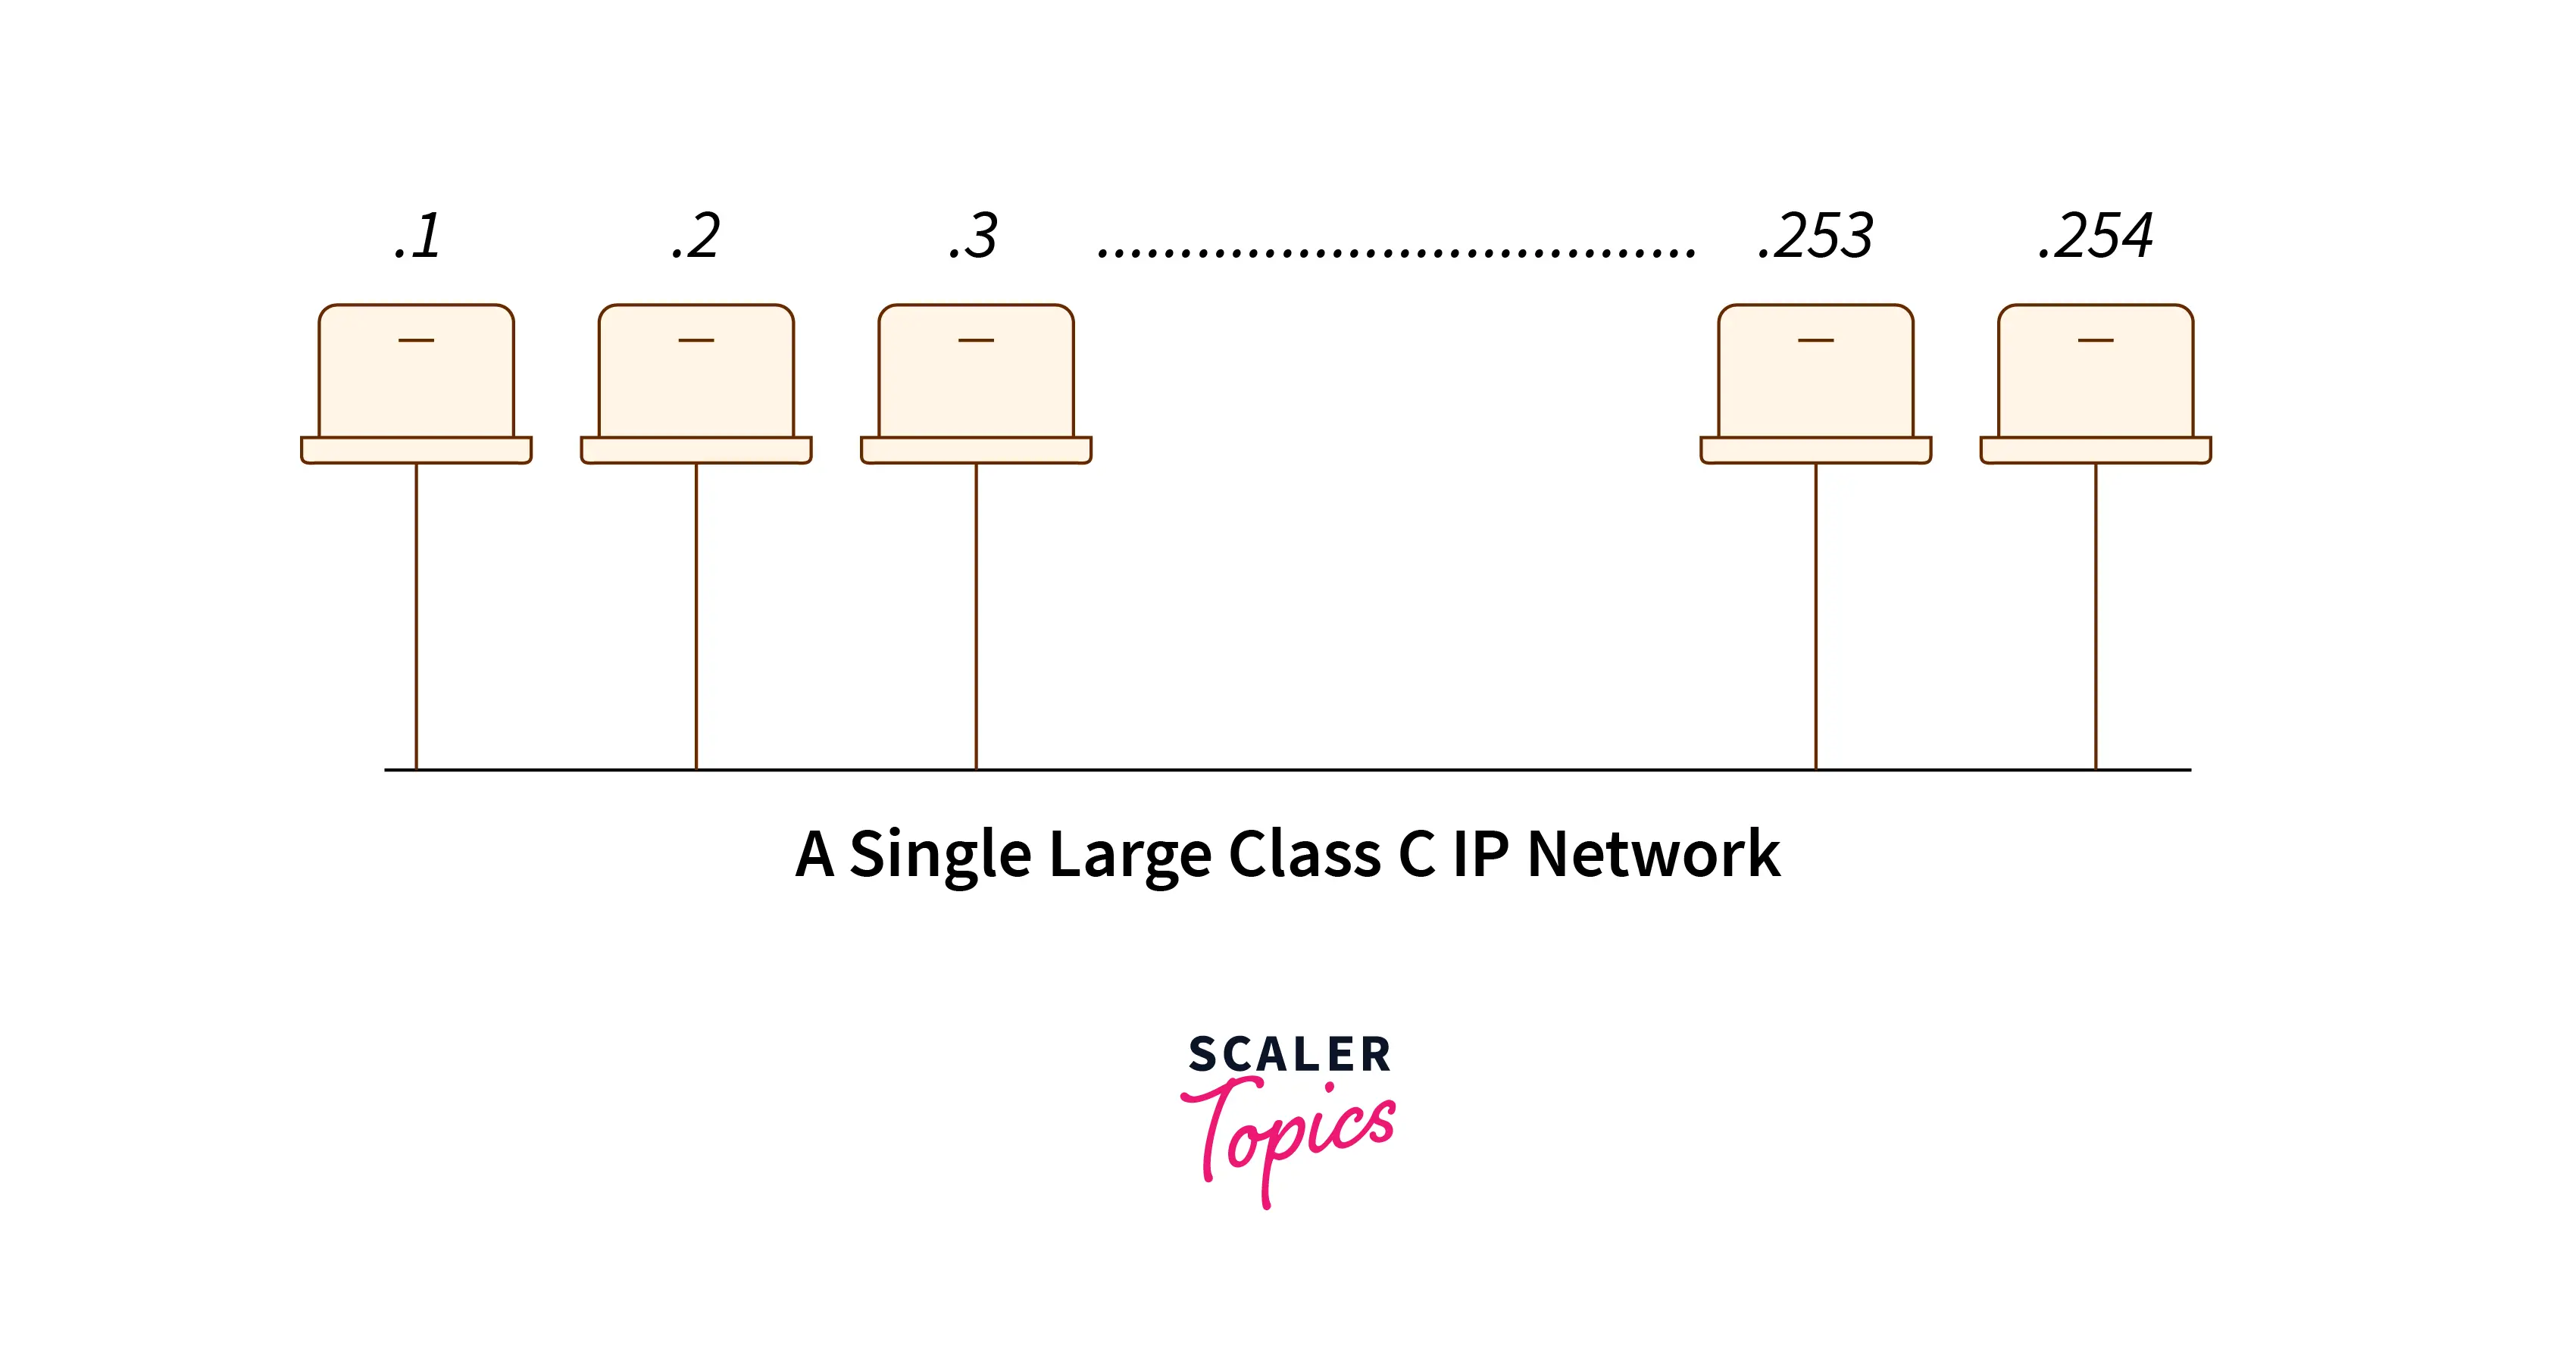 A single large class C IP Network